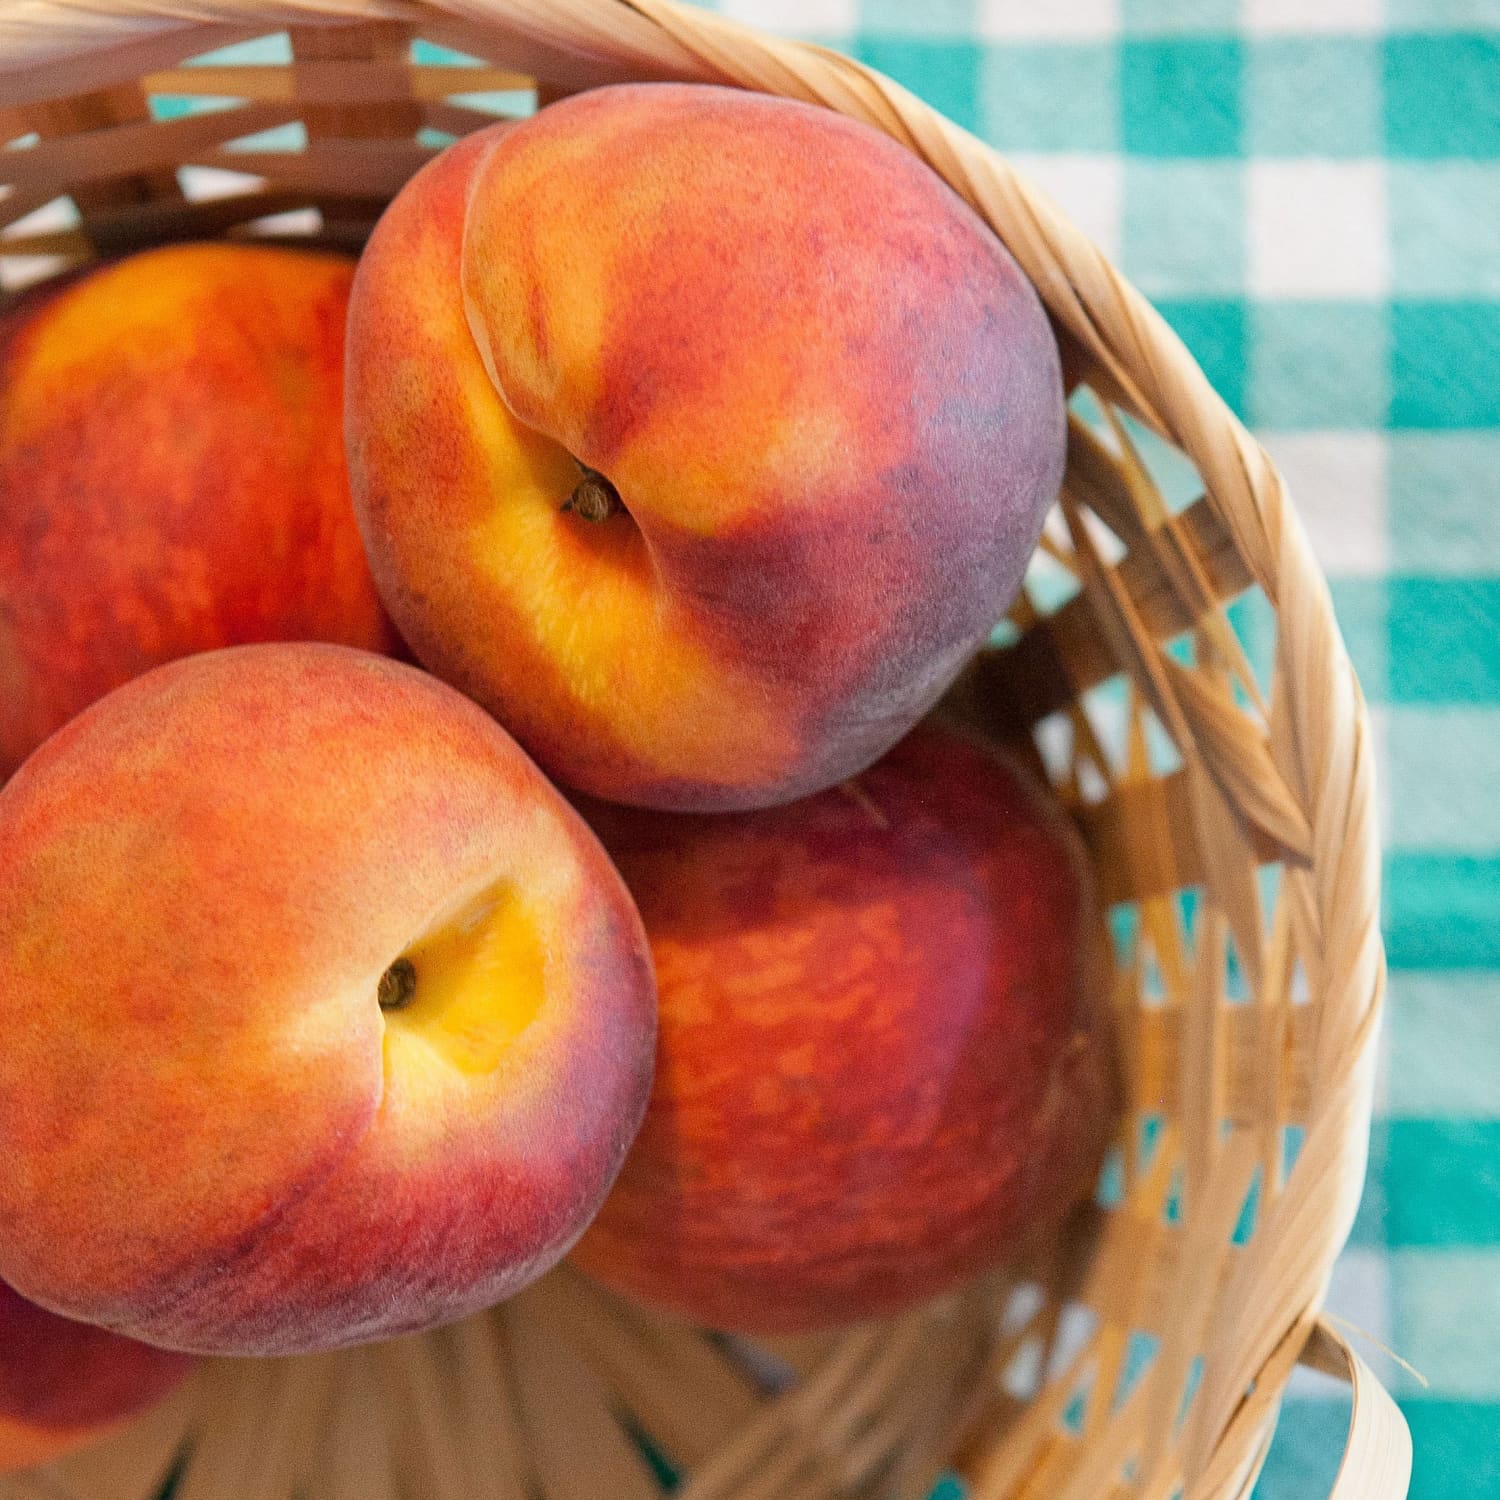 How to Tell if a Peach is Ripe